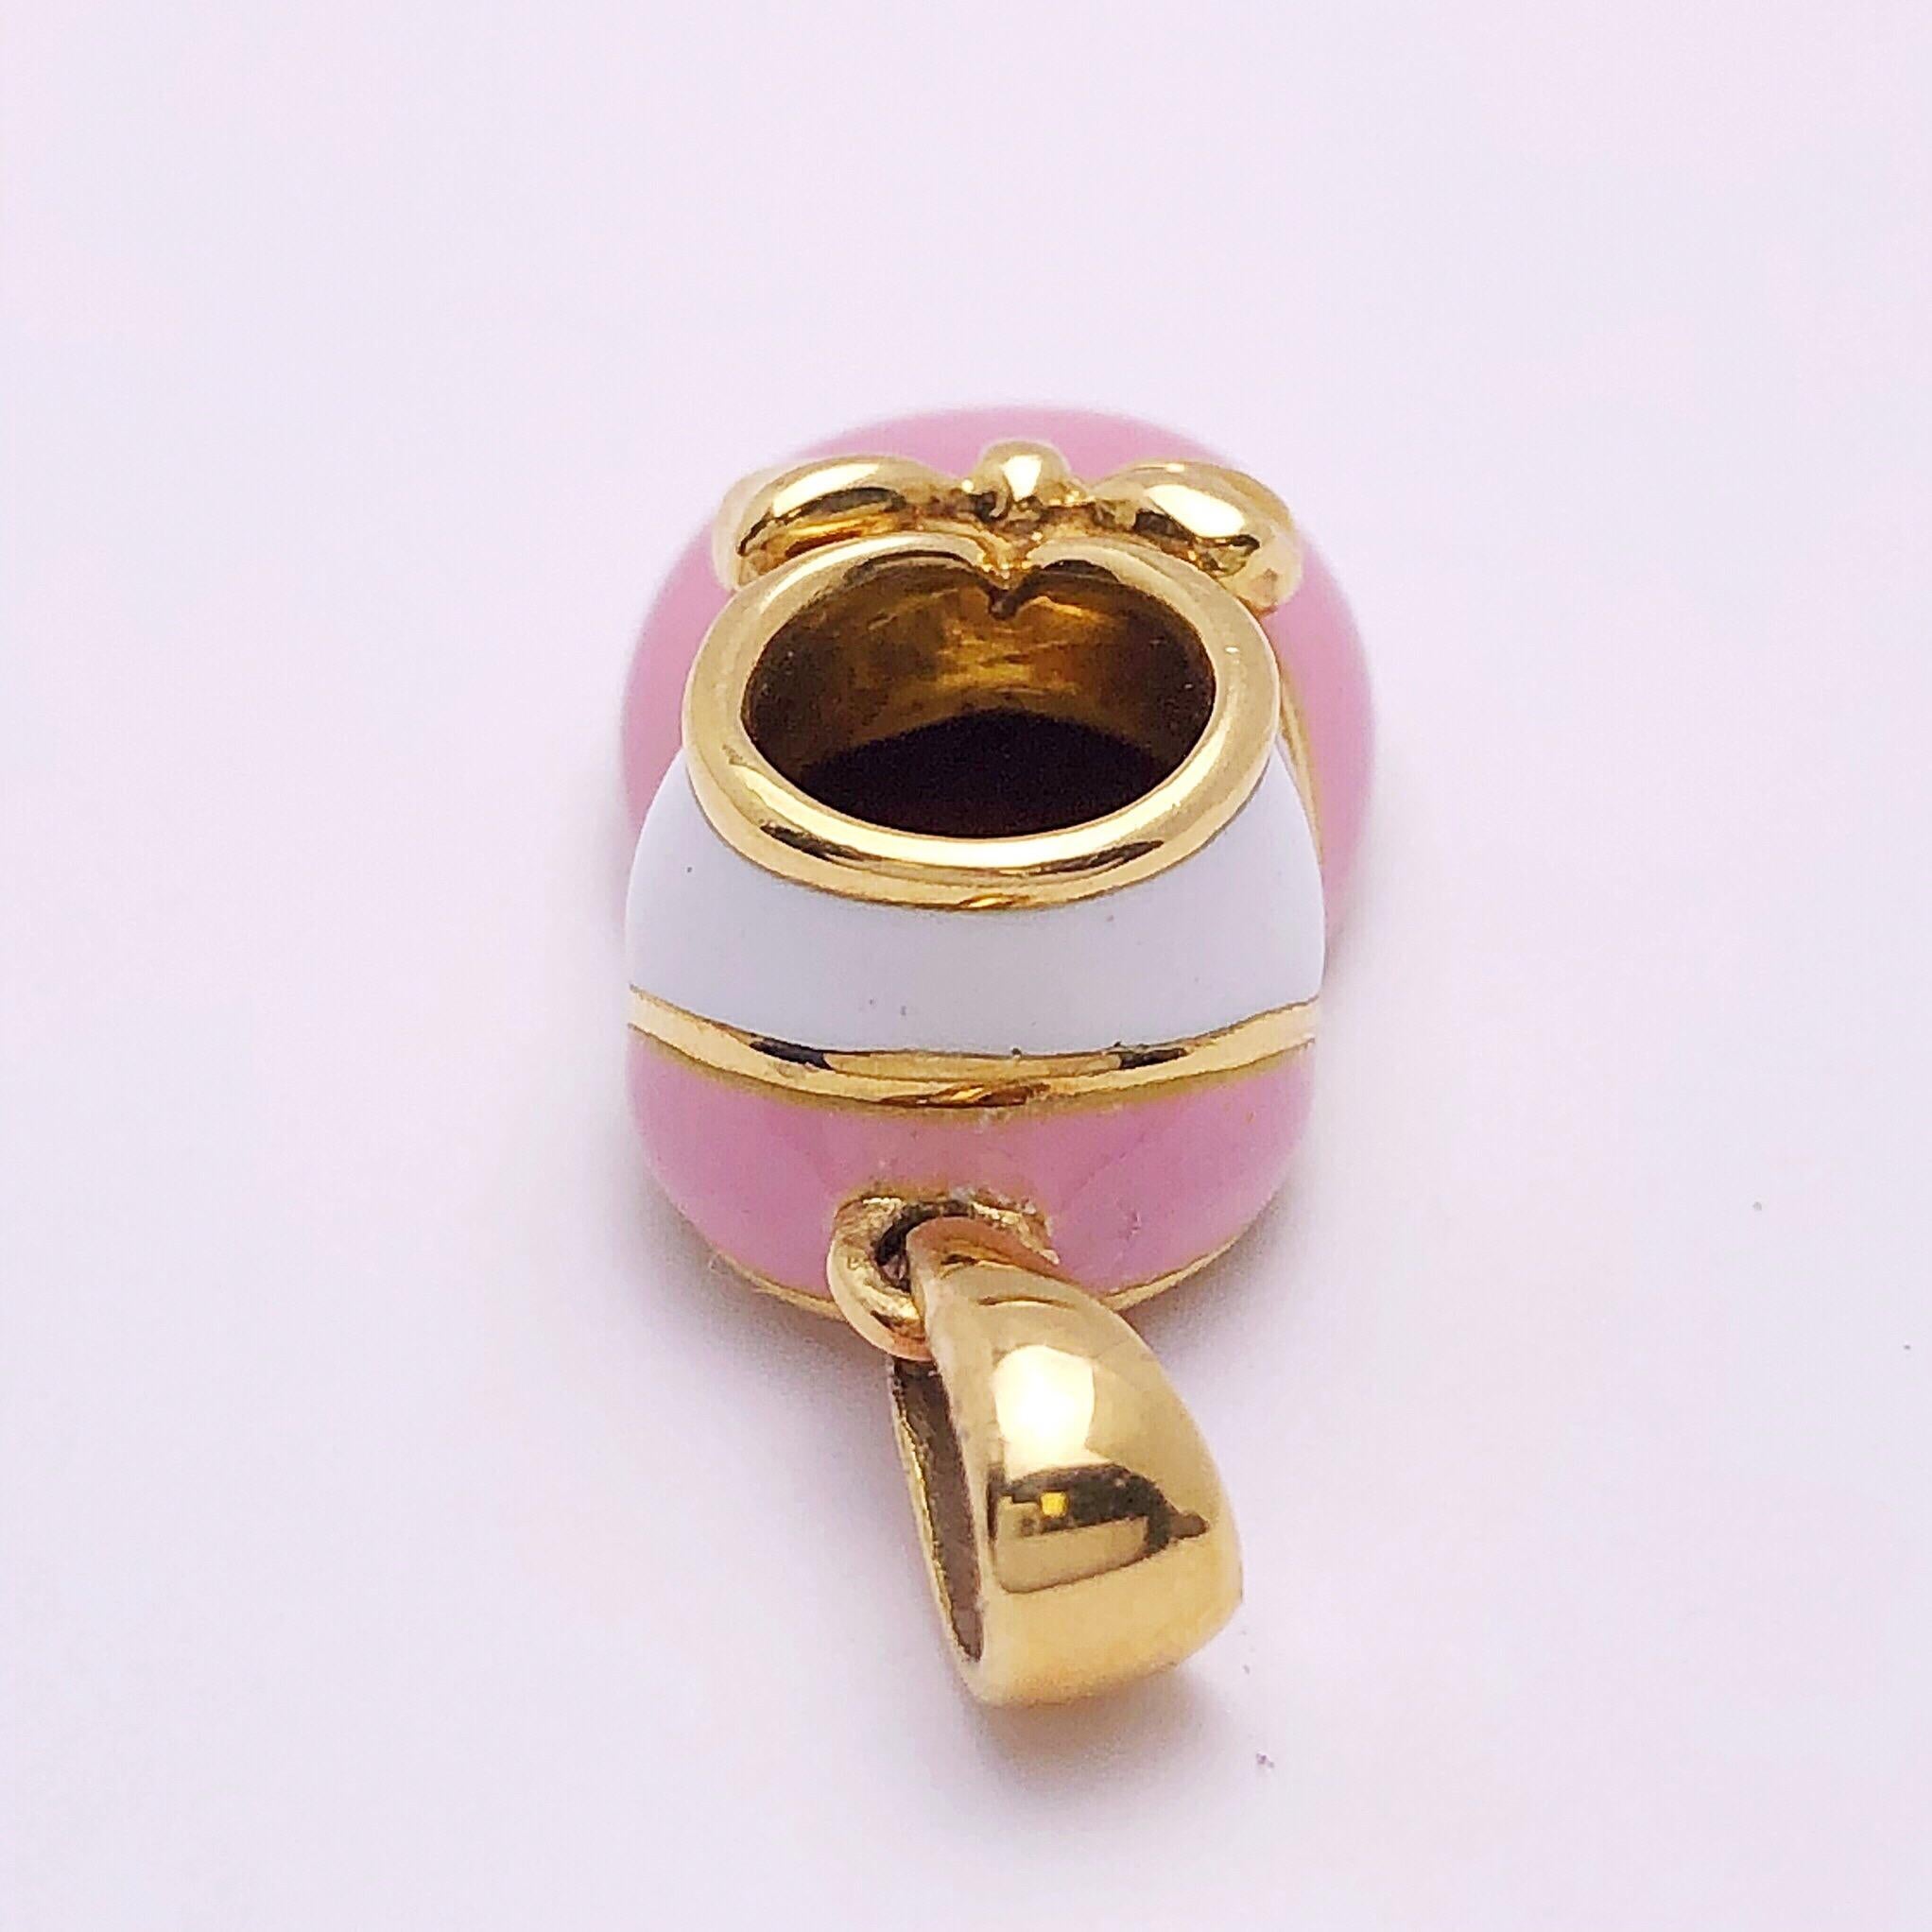 Modern 18 Karat Yellow Gold Baby Shoe Charm with Pink and White Enamel